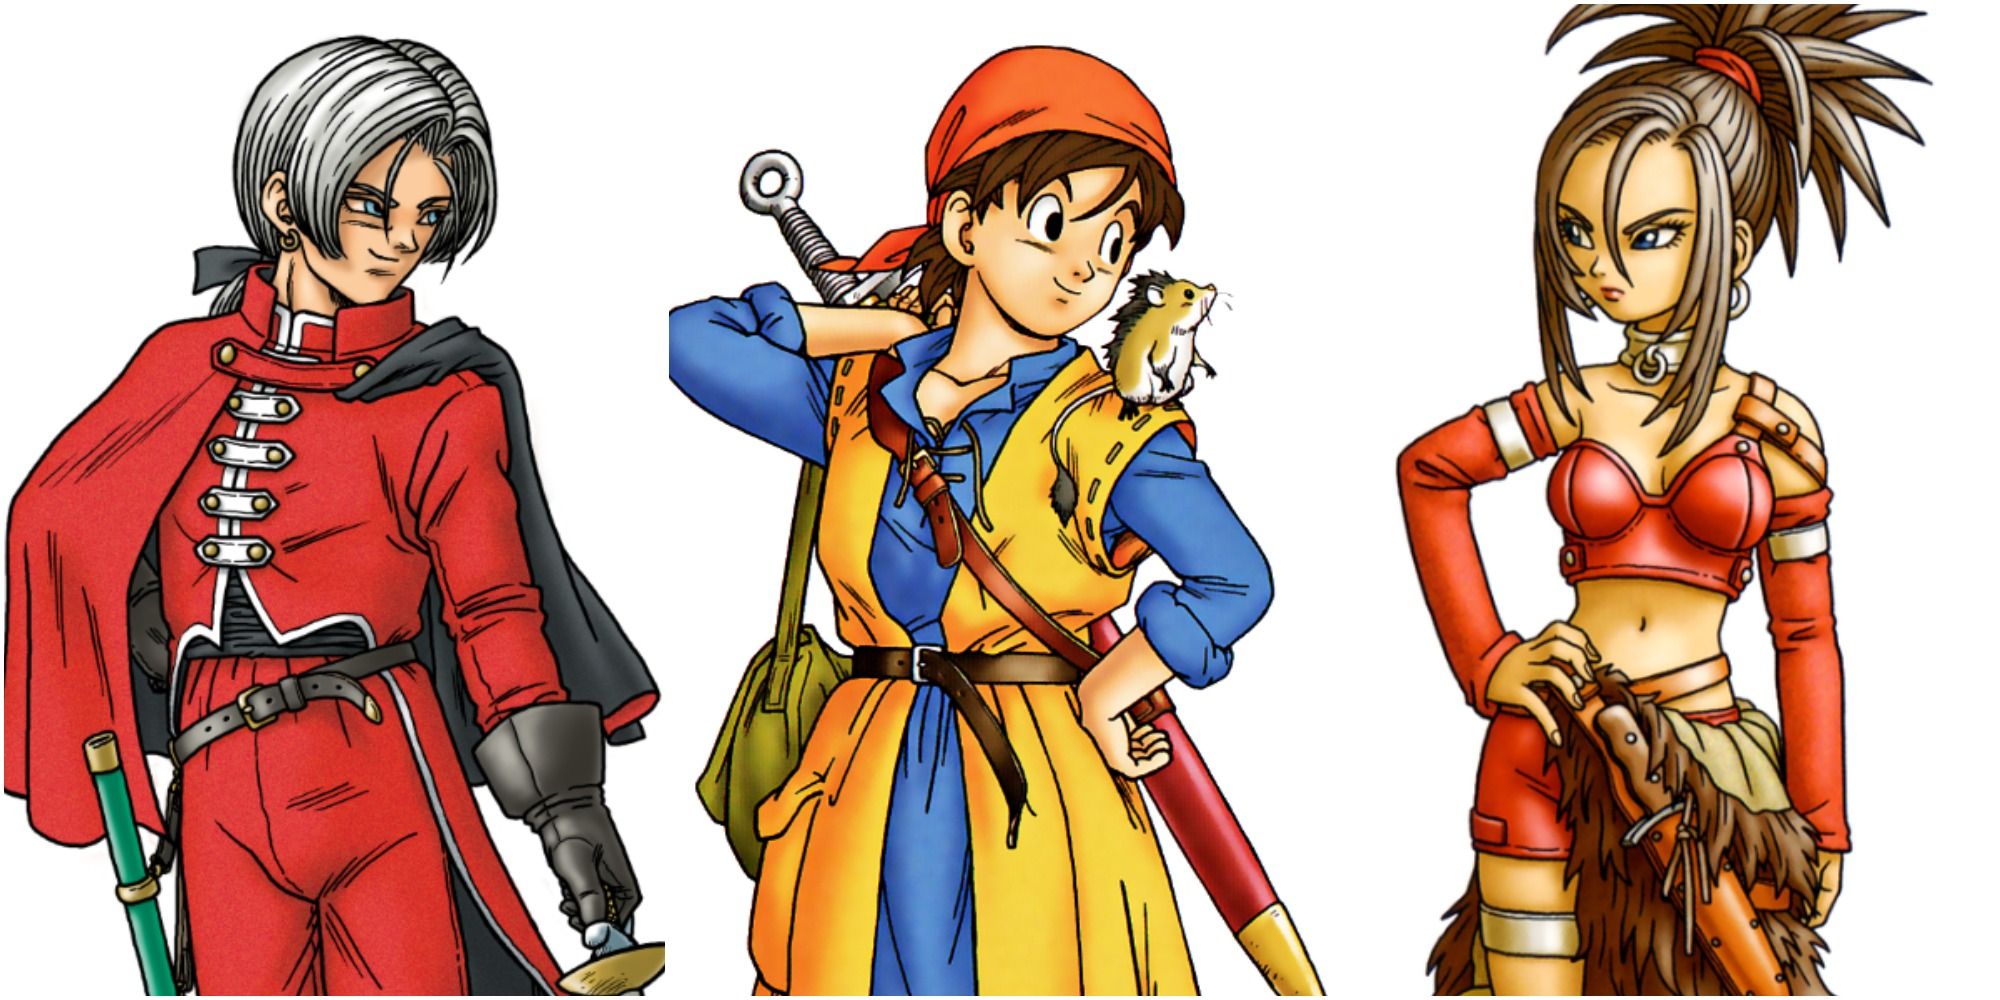 Hick katalog Specialitet Every Party Member In Dragon Quest 8, Ranked